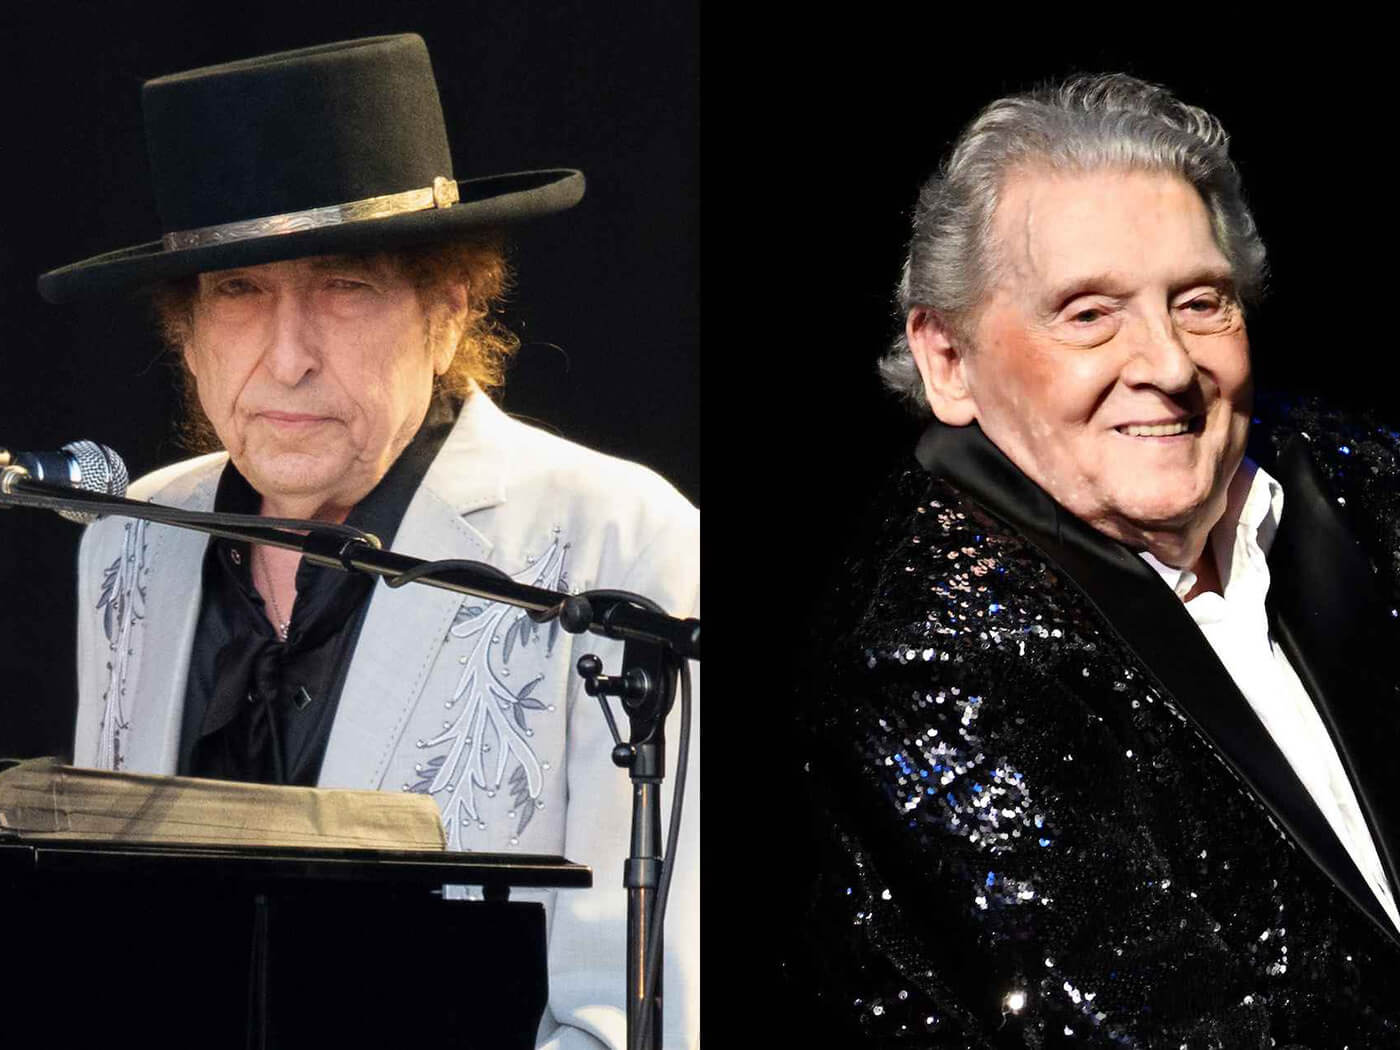 Bob Dylan covers Jerry Lee Lewis in tribute at Nottingham gig